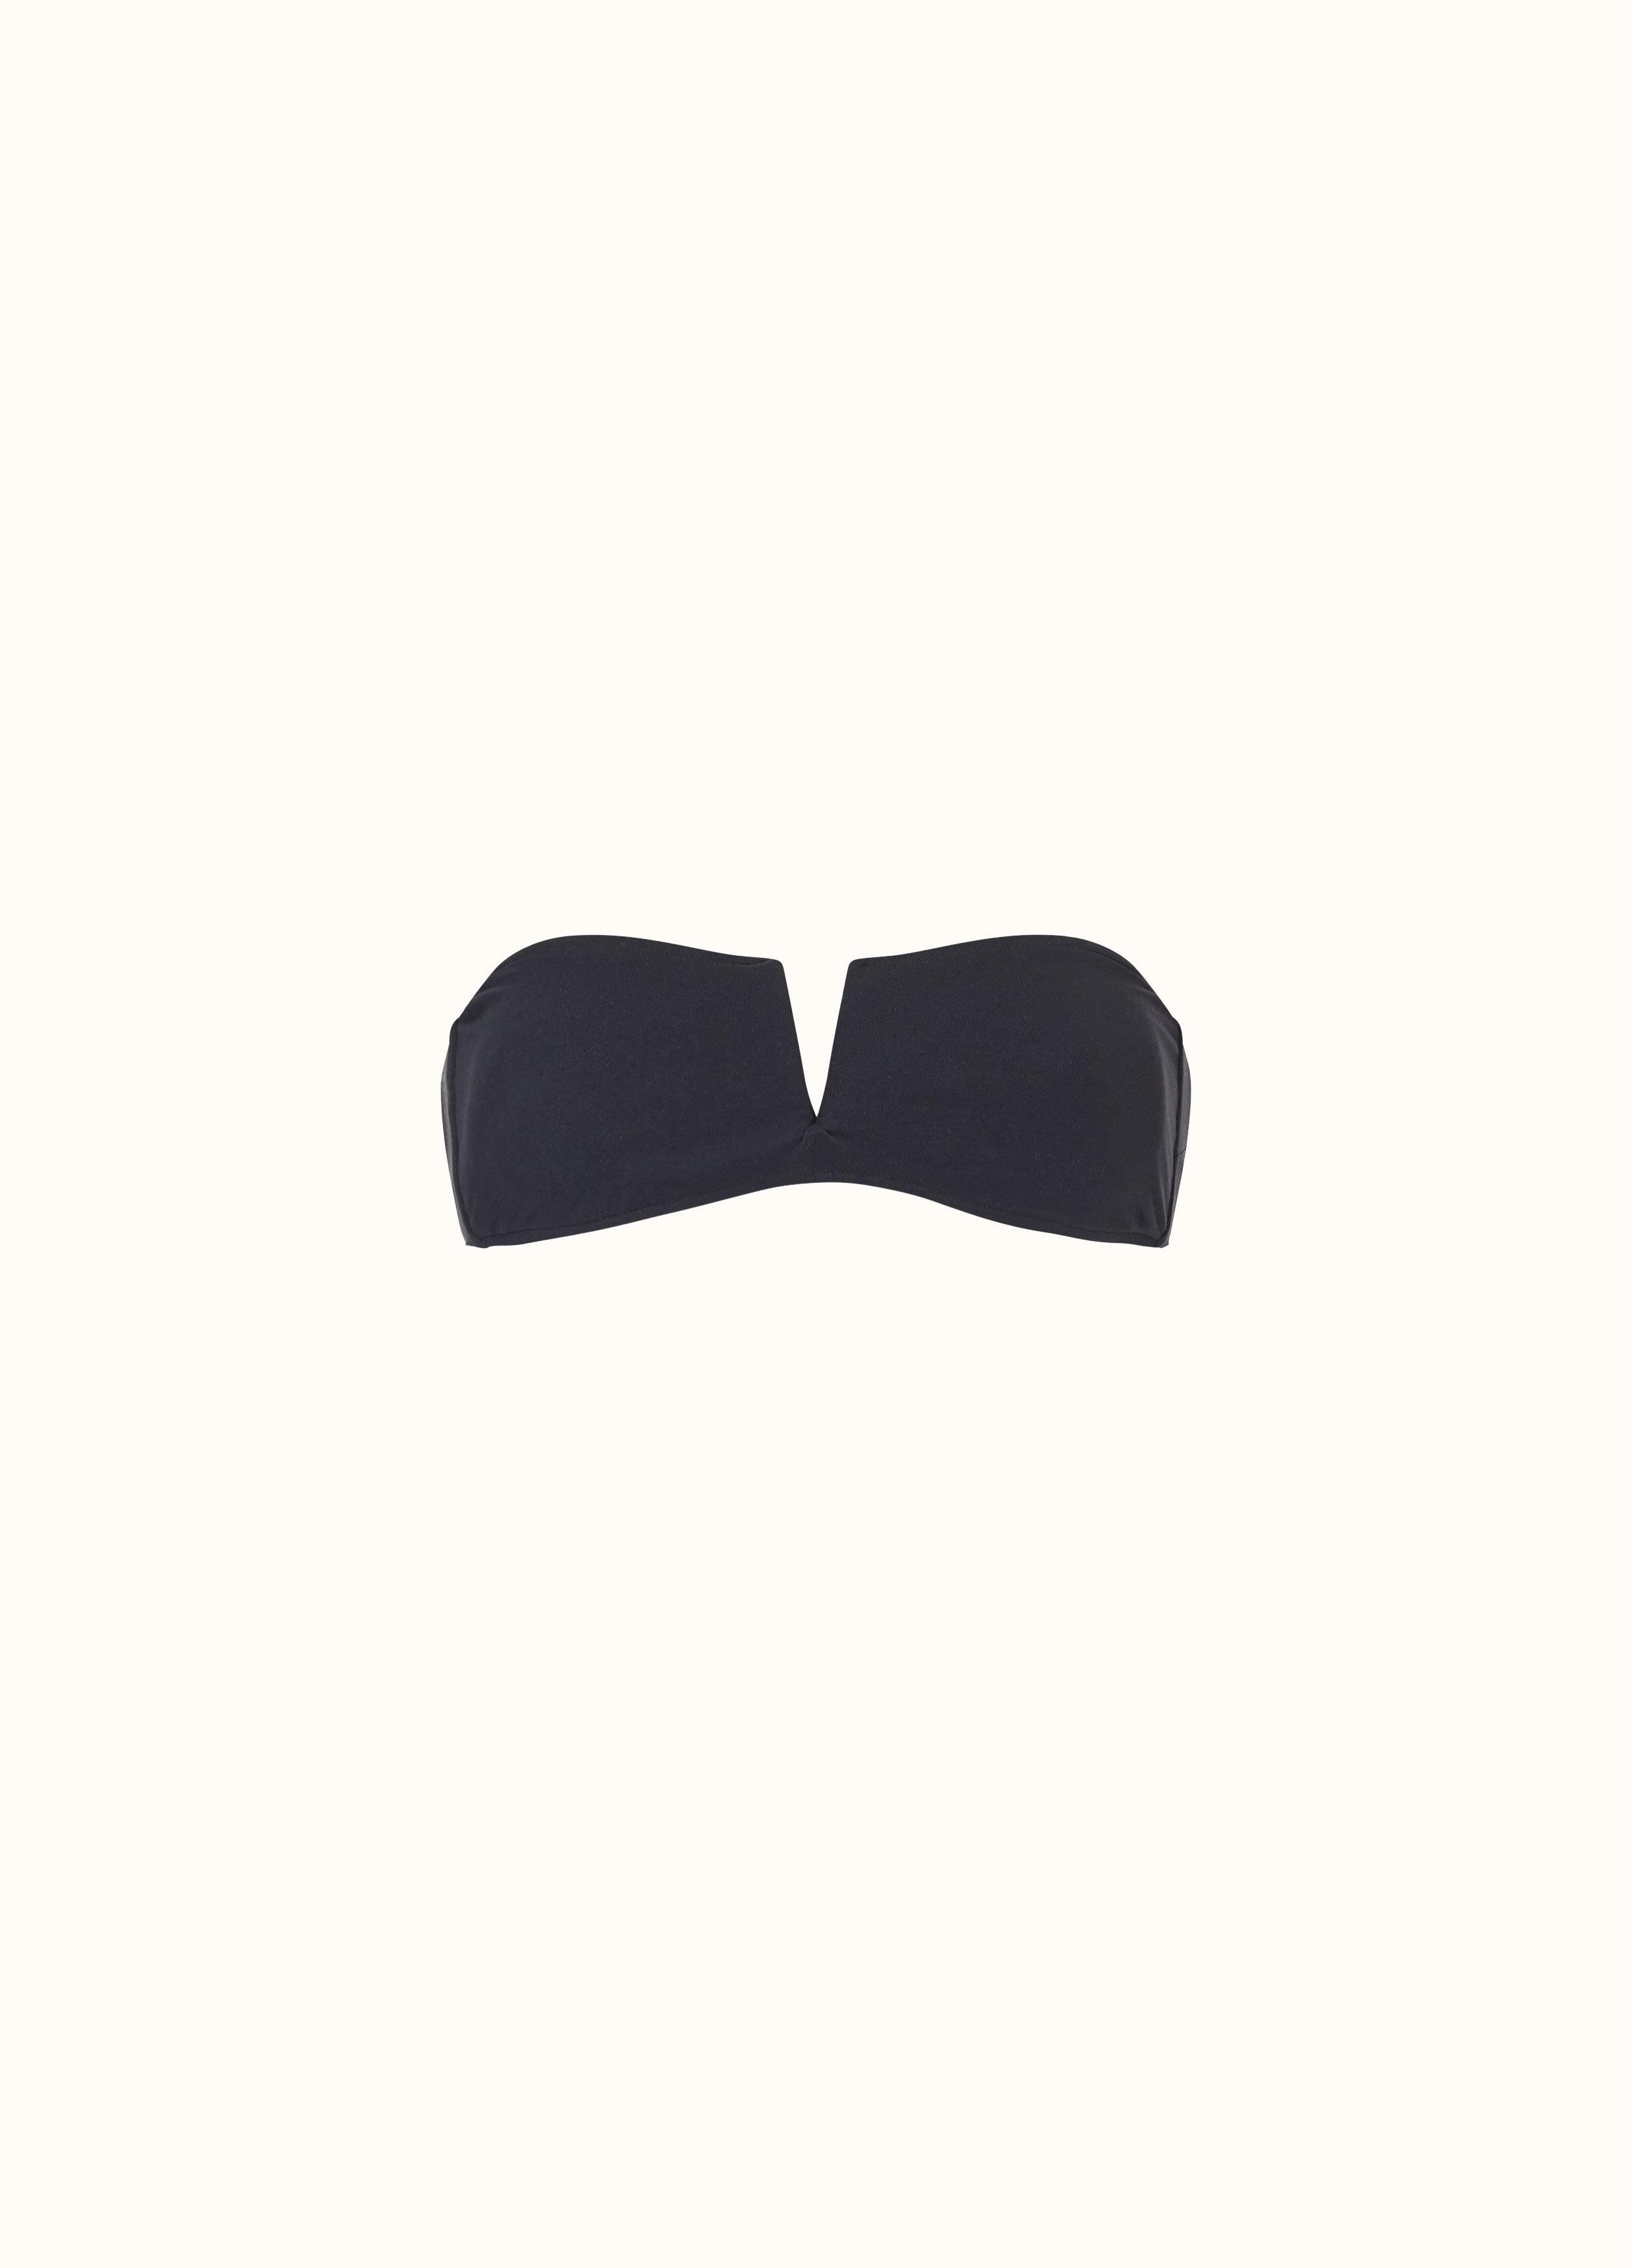 The Strapless Top - Matte Fabric